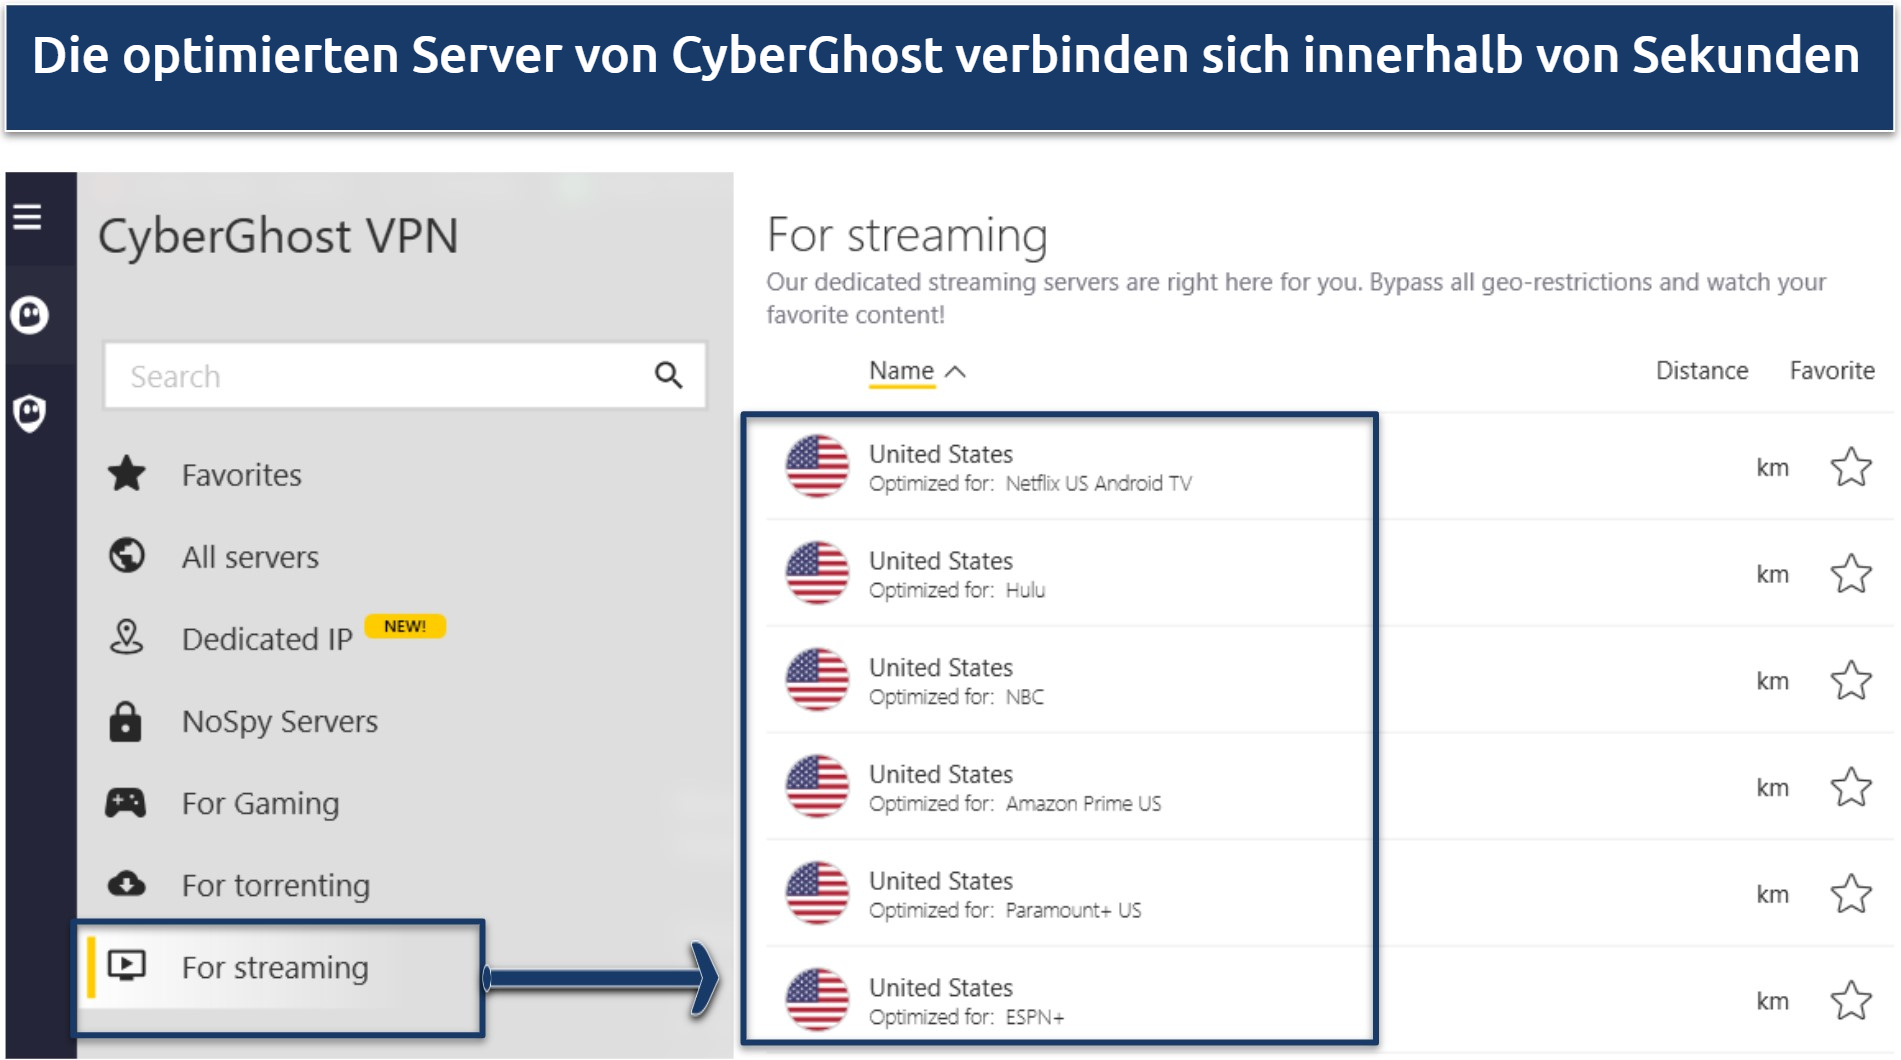 A screenshot showing CyberGhost offers specialized servers for streaming